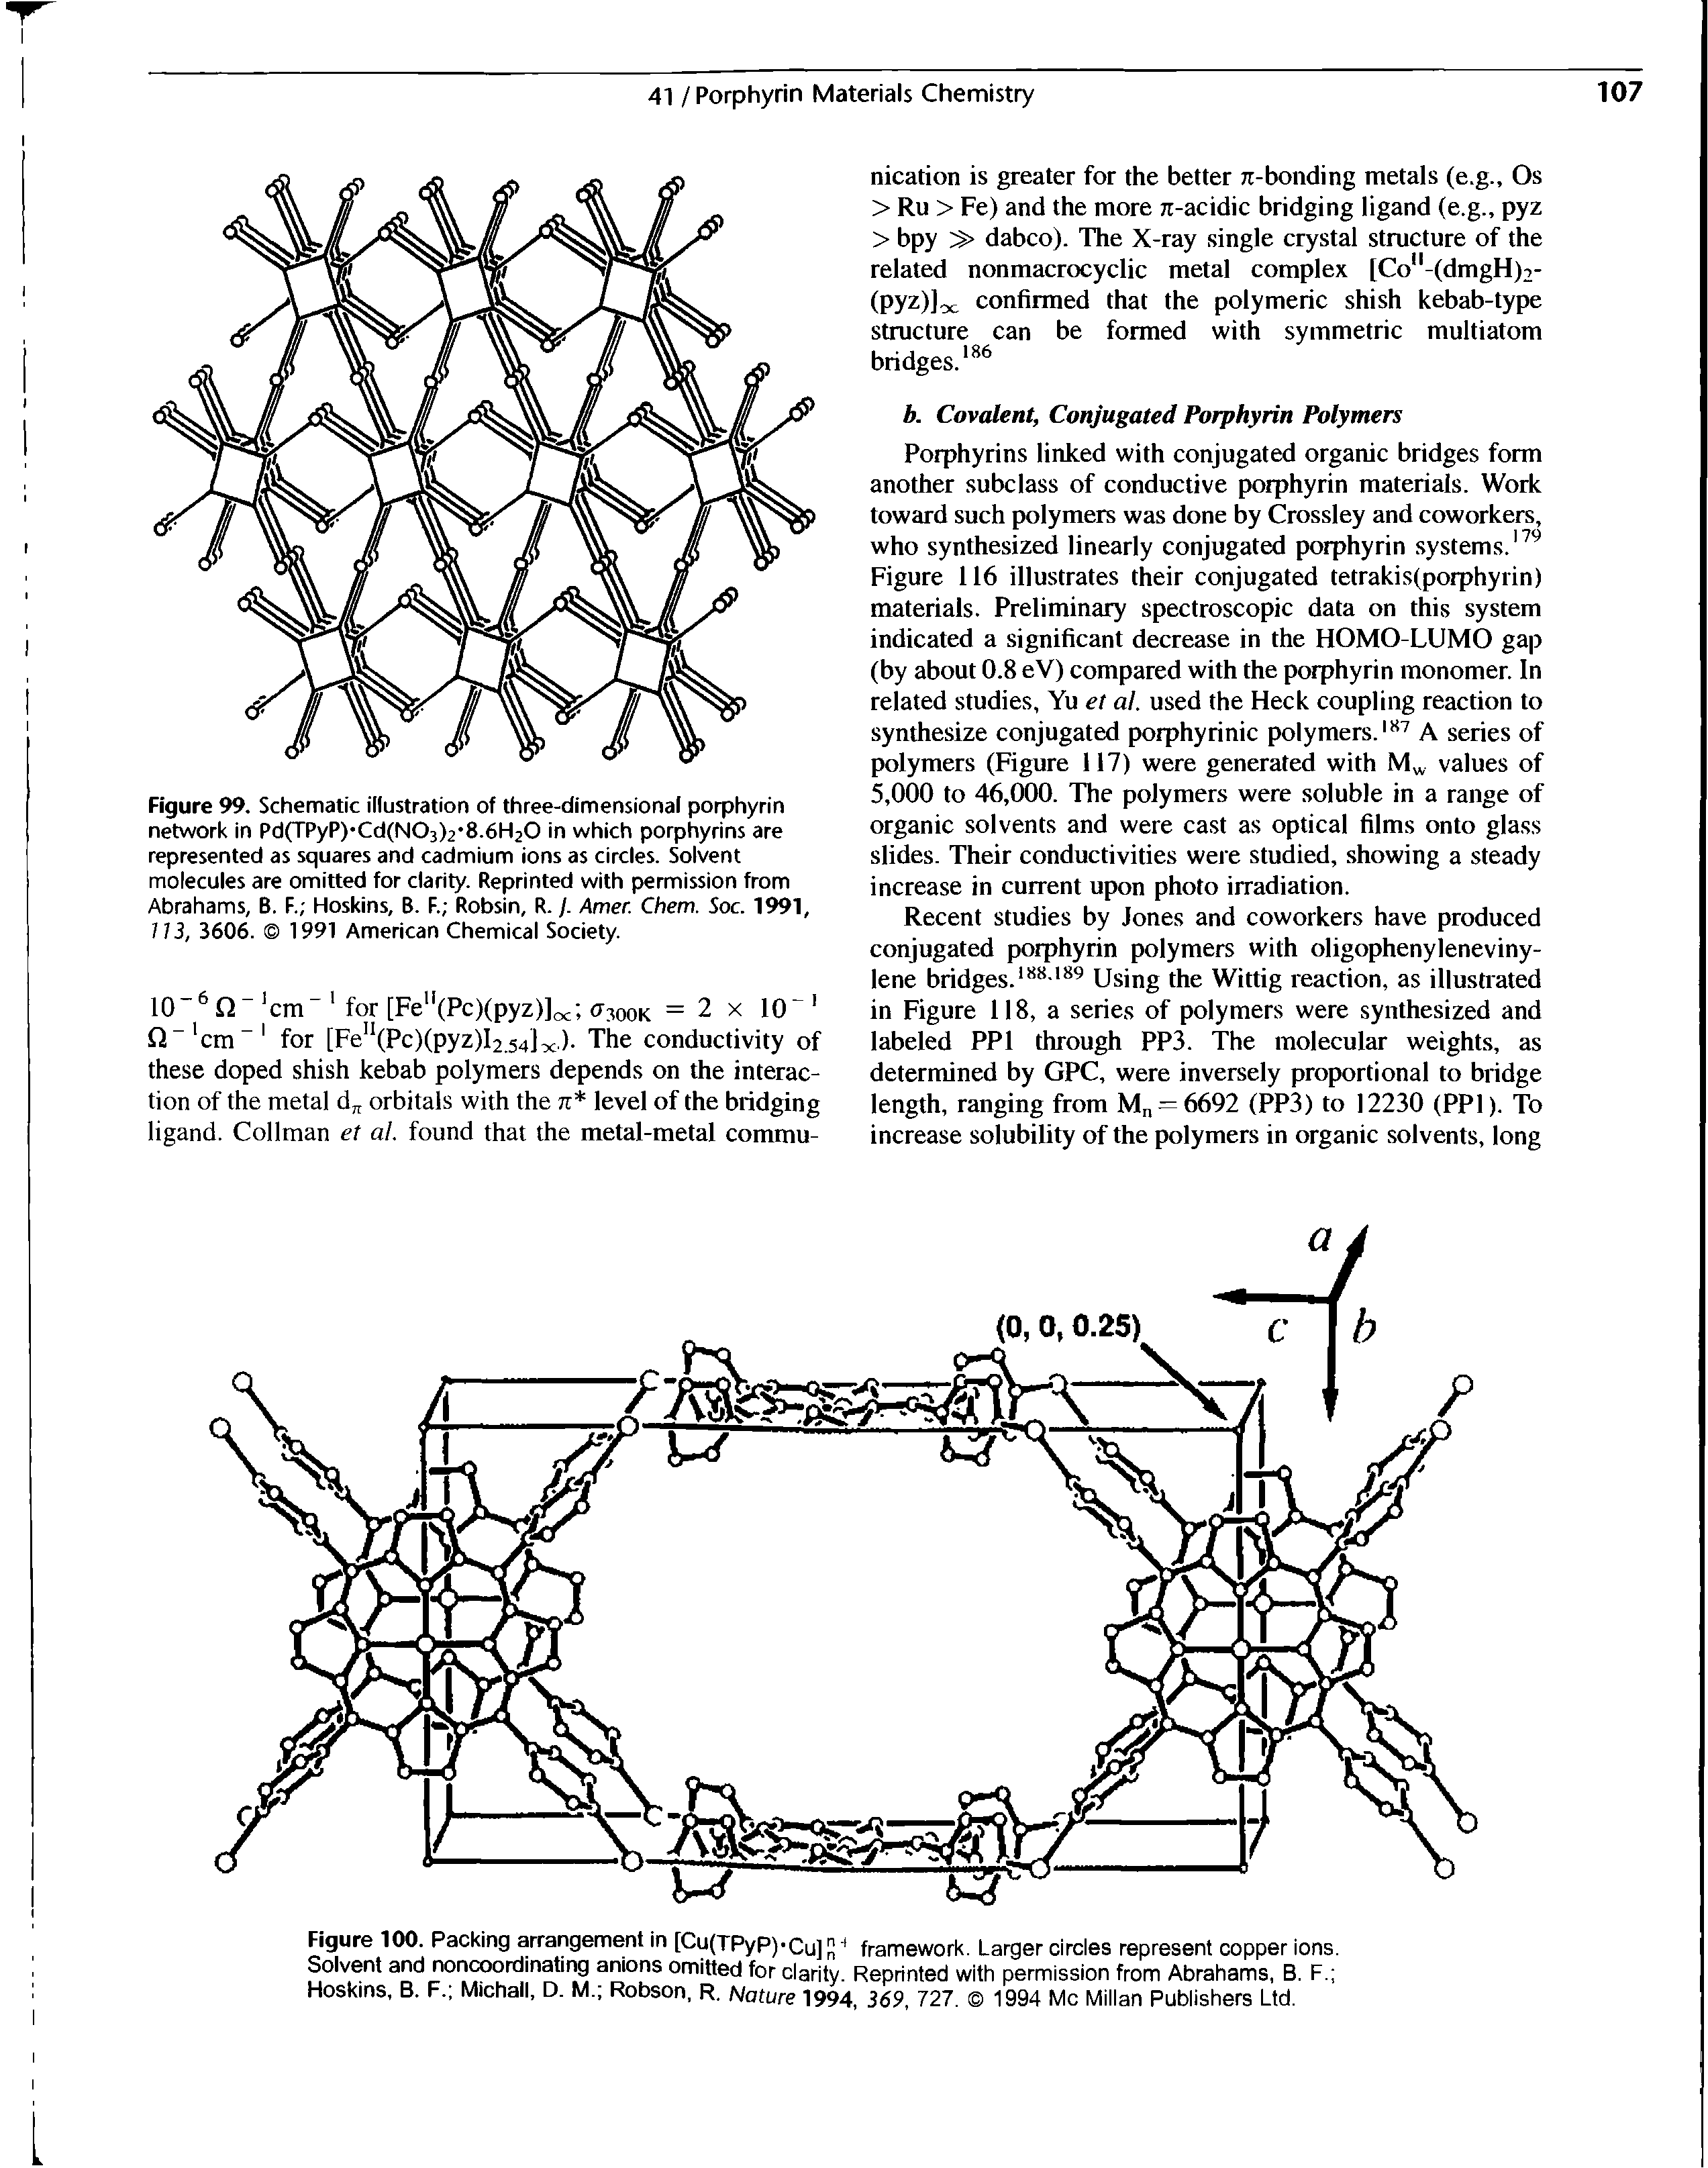 Figure 99. Schematic illustration of three-dimensional porphyrin network in Pd(TPyP) Cd(NO3)2 8.6H20 in which porphyrins are represented as squares and cadmium ions as circles. Solvent molecules are omitted for clarity. Reprinted with permission from Abrahams, B. F. Hoskins, B. F. Robsin, R. /. Amer. Chem. Soc. 1991, / / 3, 3606. 1991 American Chemical Society.